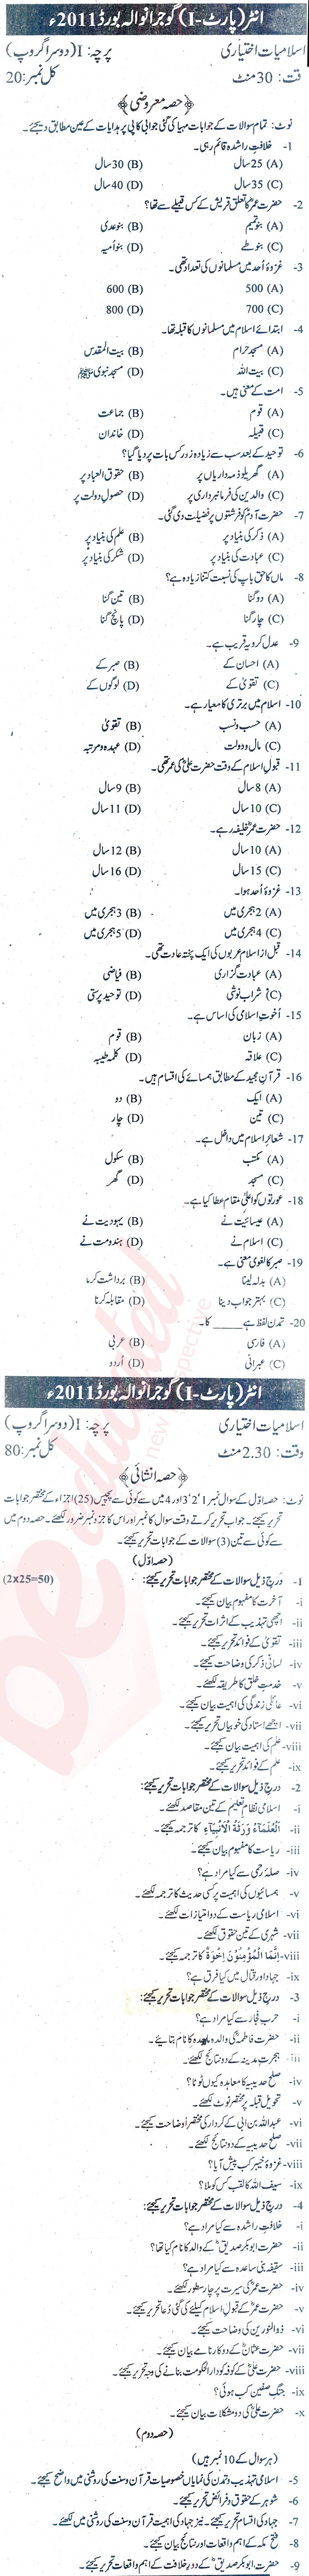 Islamiat Elective FA Part 1 Past Paper Group 2 BISE Gujranwala 2011